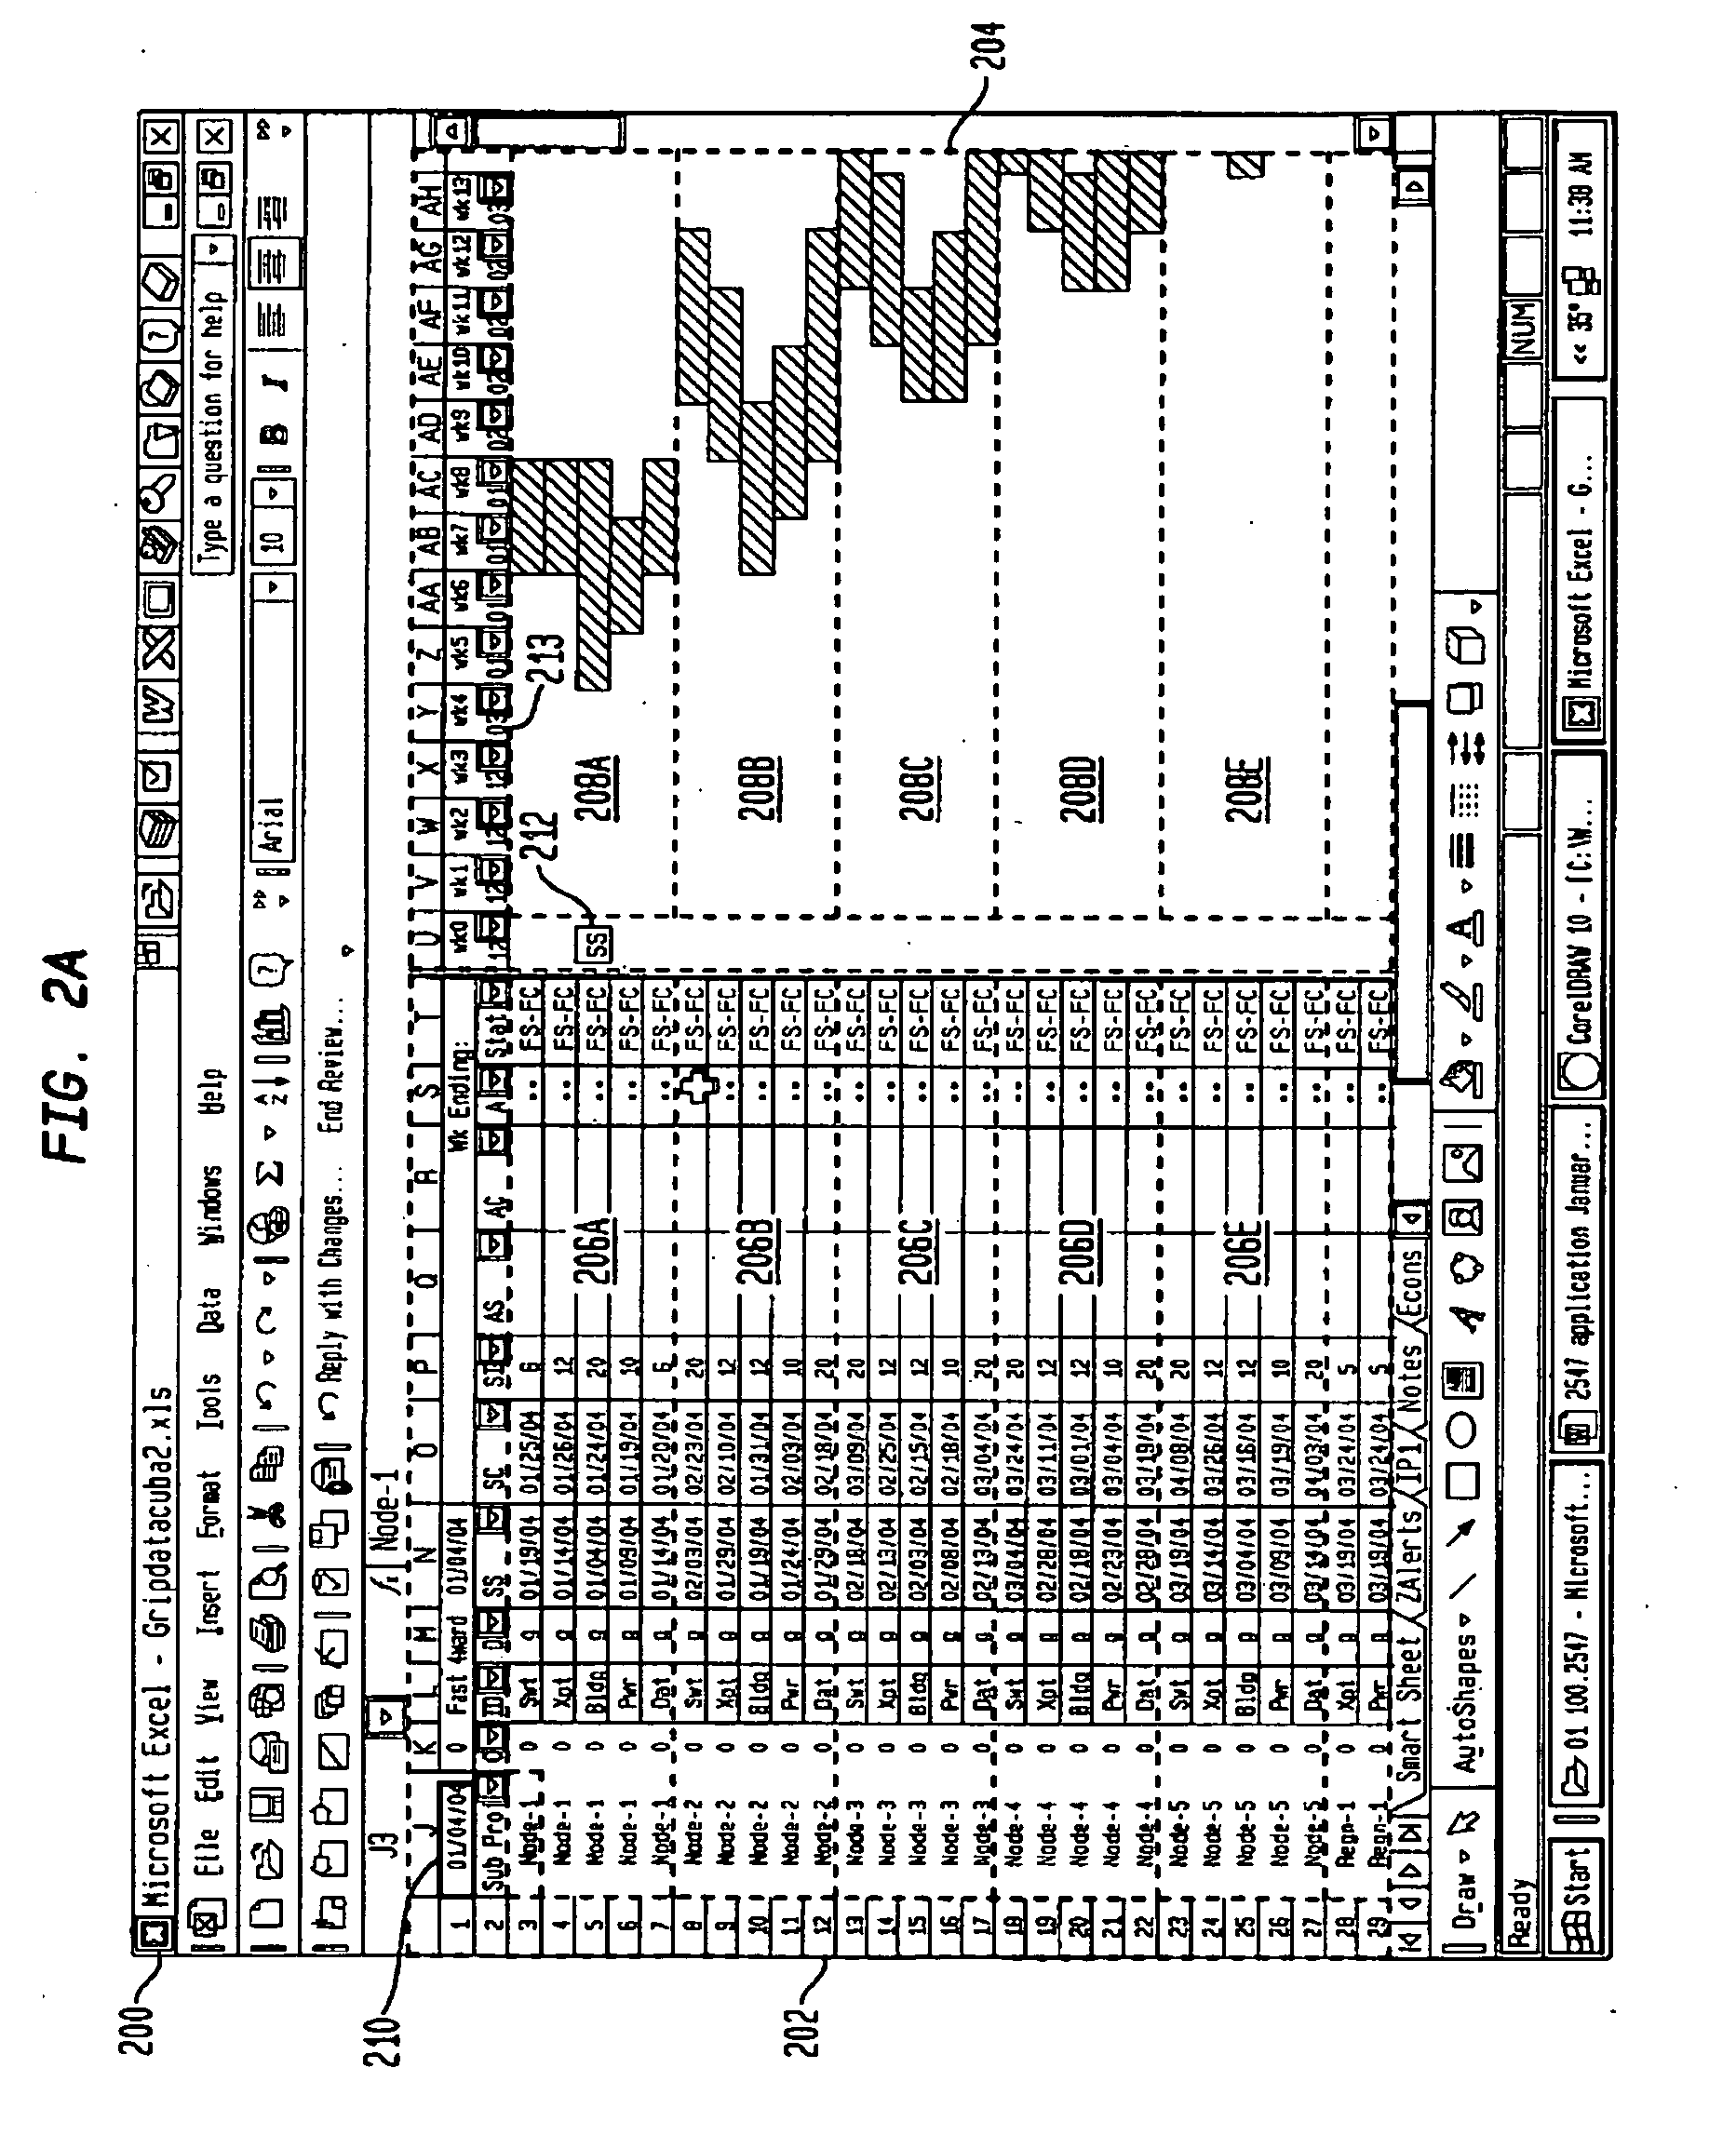 Methods and apparatus for associating and displaying project planning and management information in conjunction with geographic information